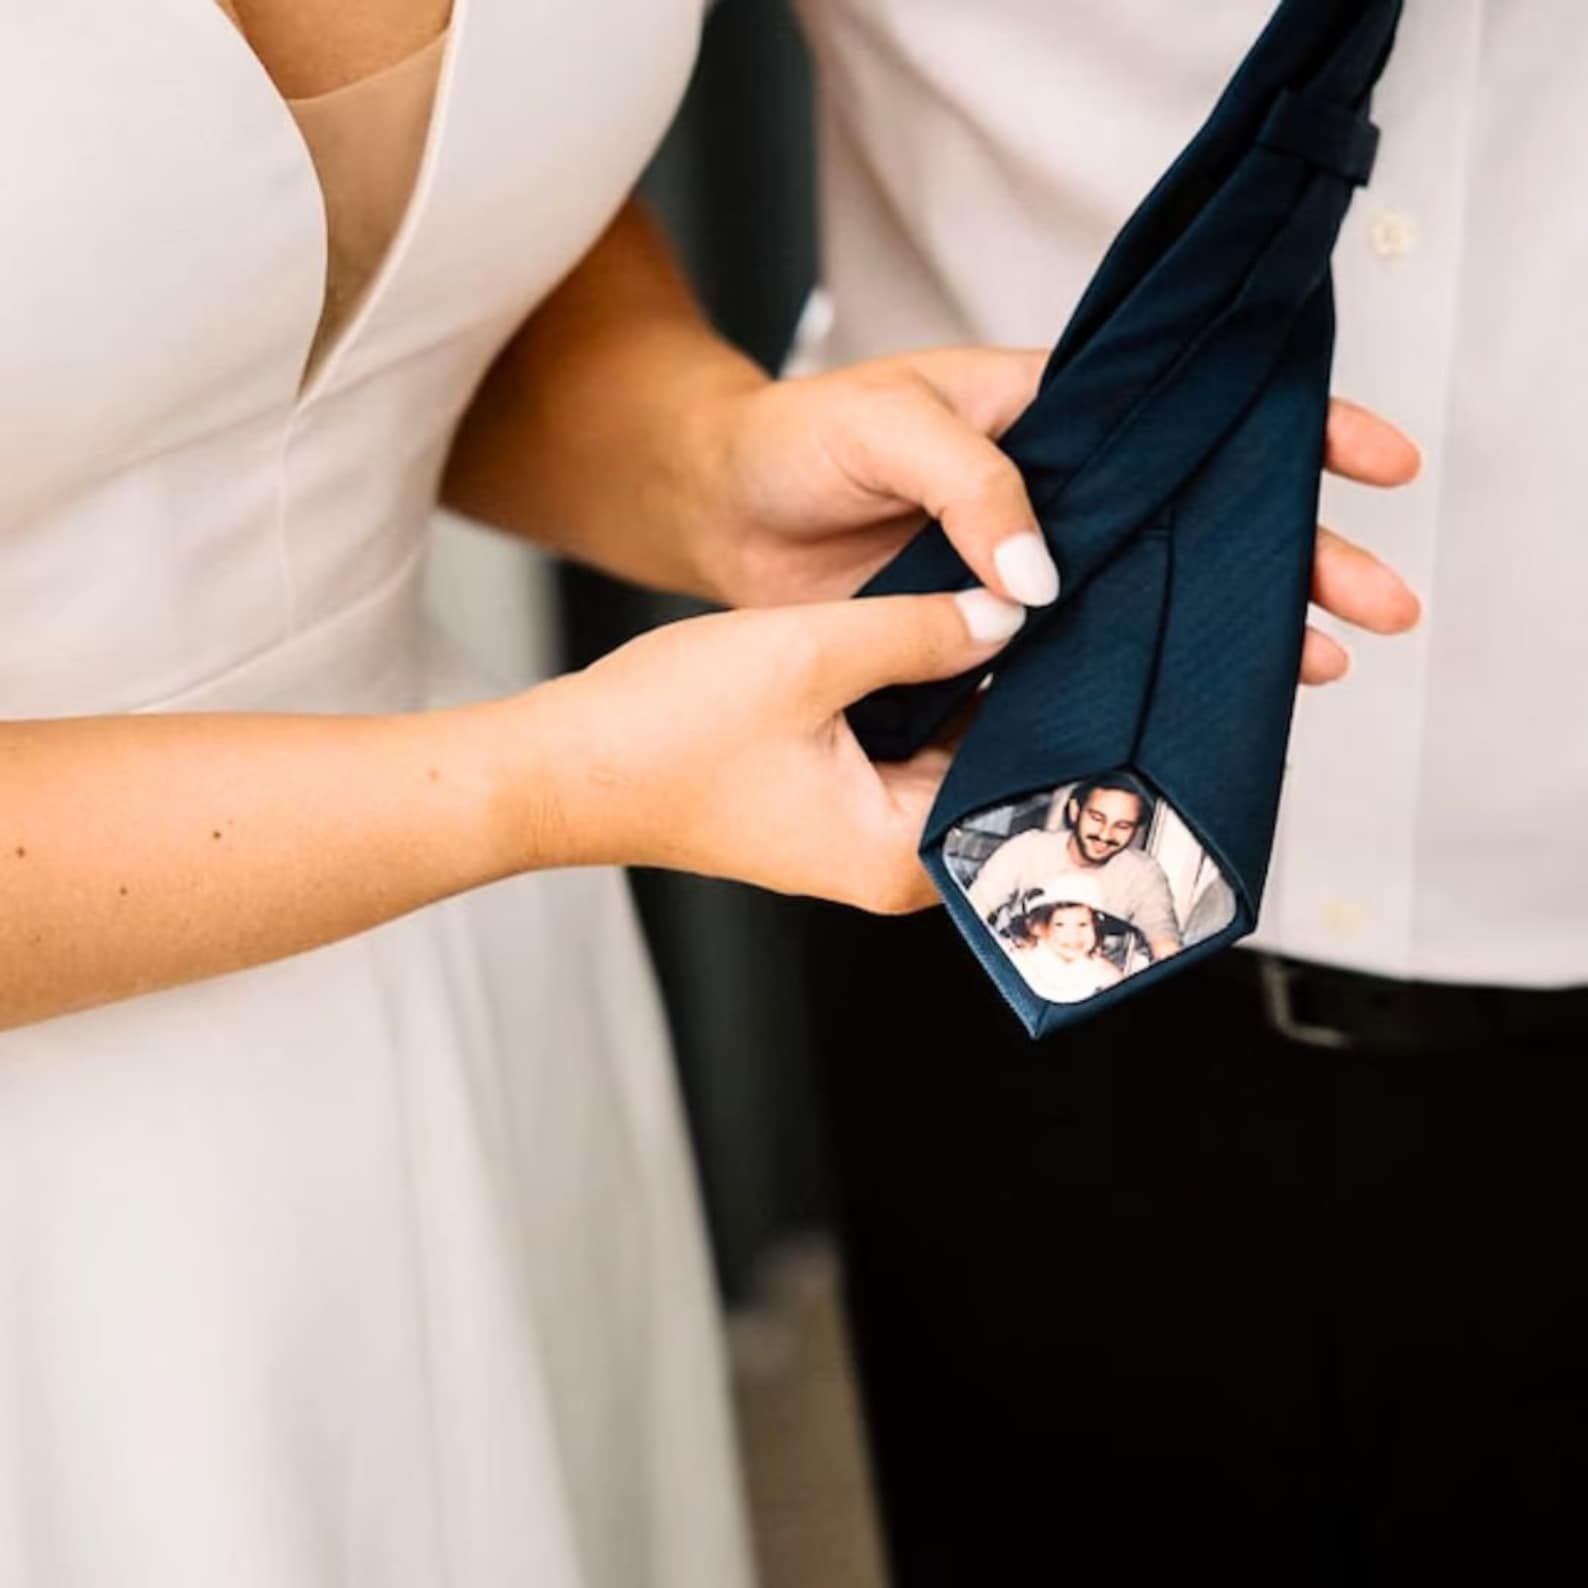 Bride-and-groom-holding-a-navy-tie-with-a-custom-photo-tie-patch-featuring-a-father-and-baby.